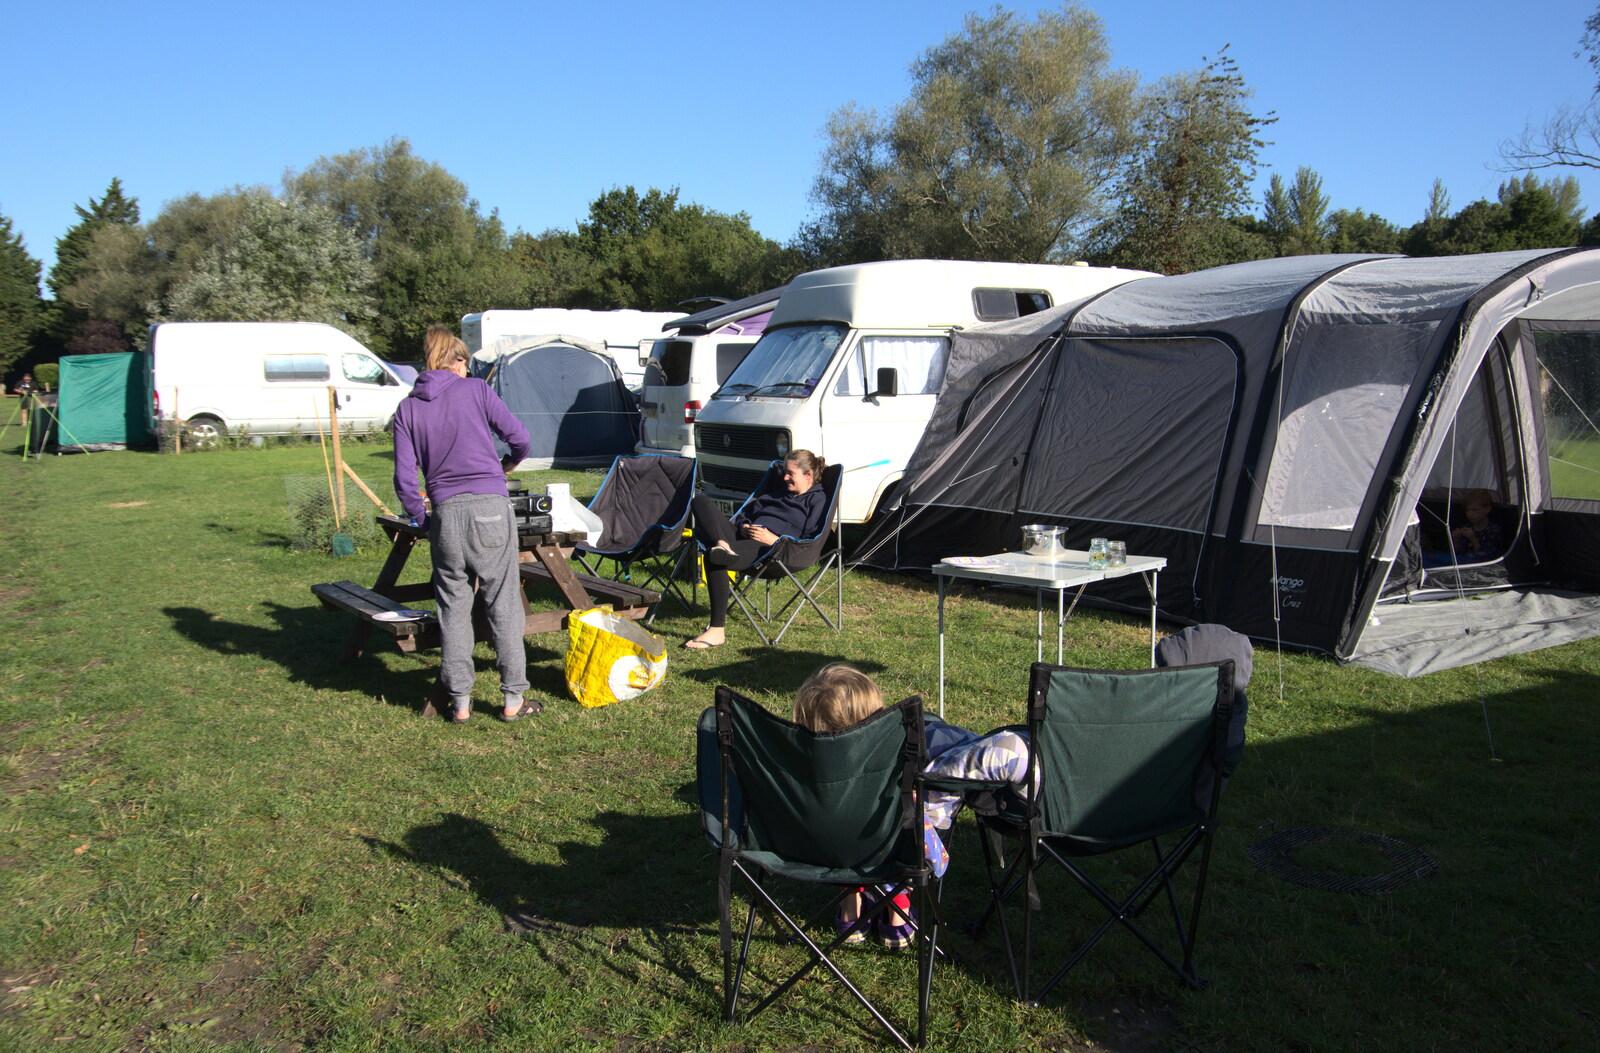 Hanging around the camp site from Camping at Three Rivers, Geldeston, Norfolk - 5th September 2020